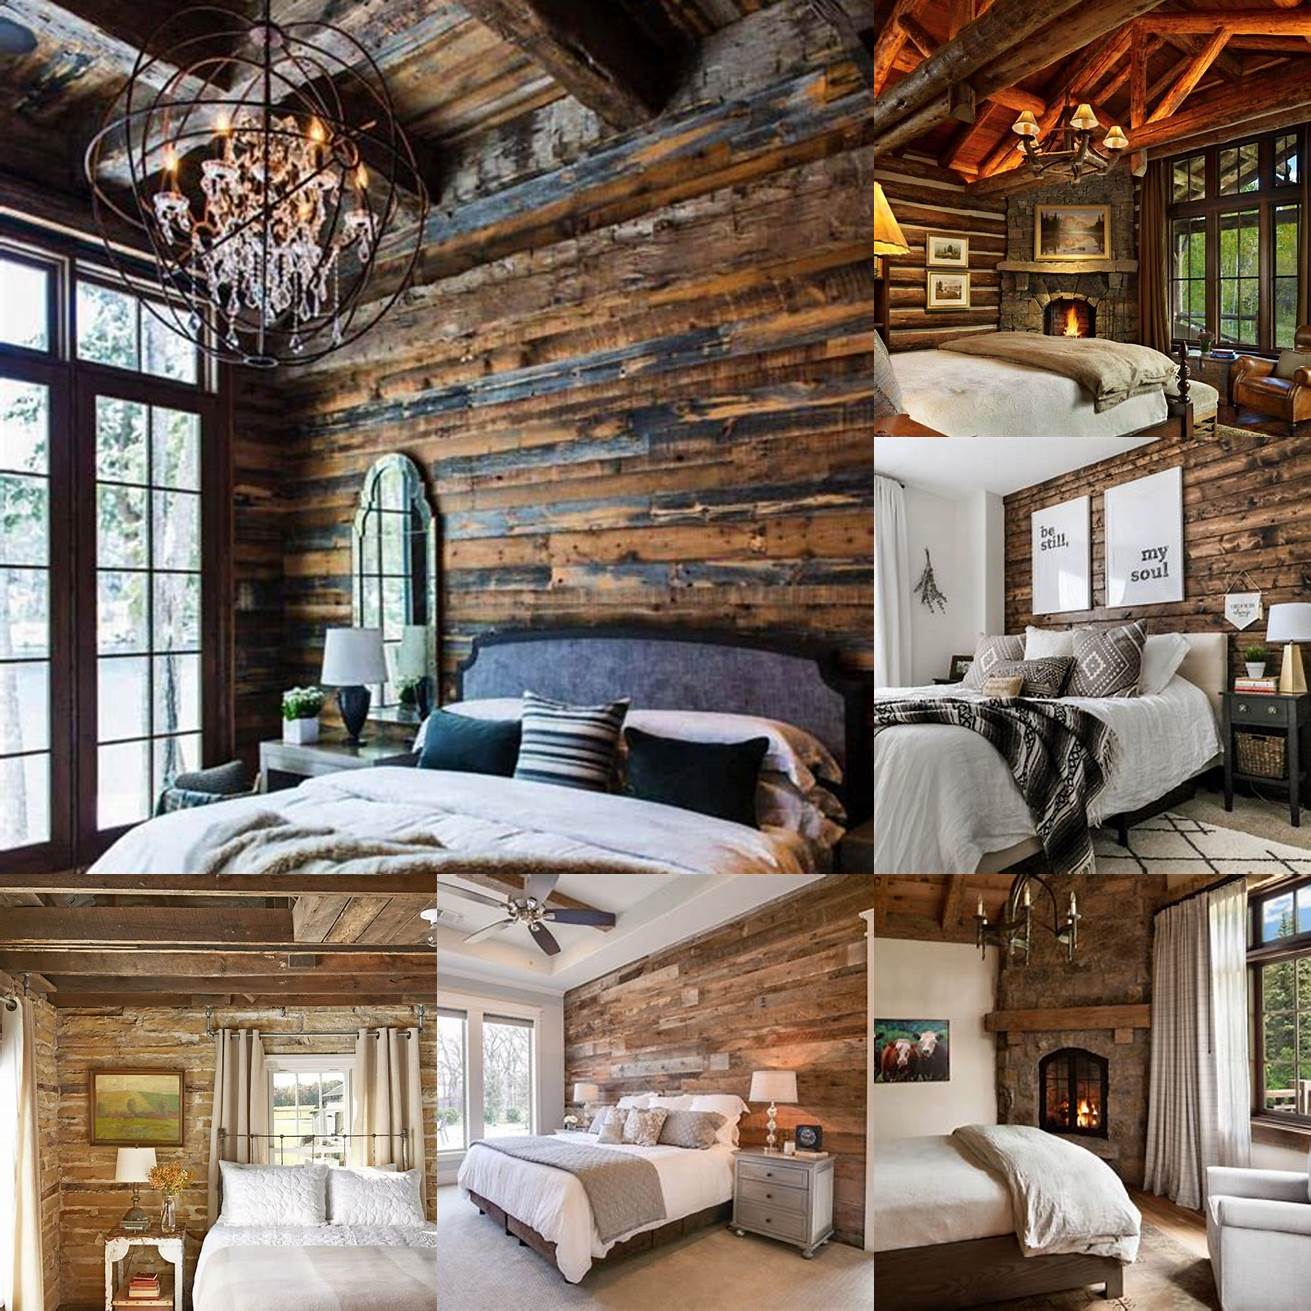 Rustic bedroom with wooden accents